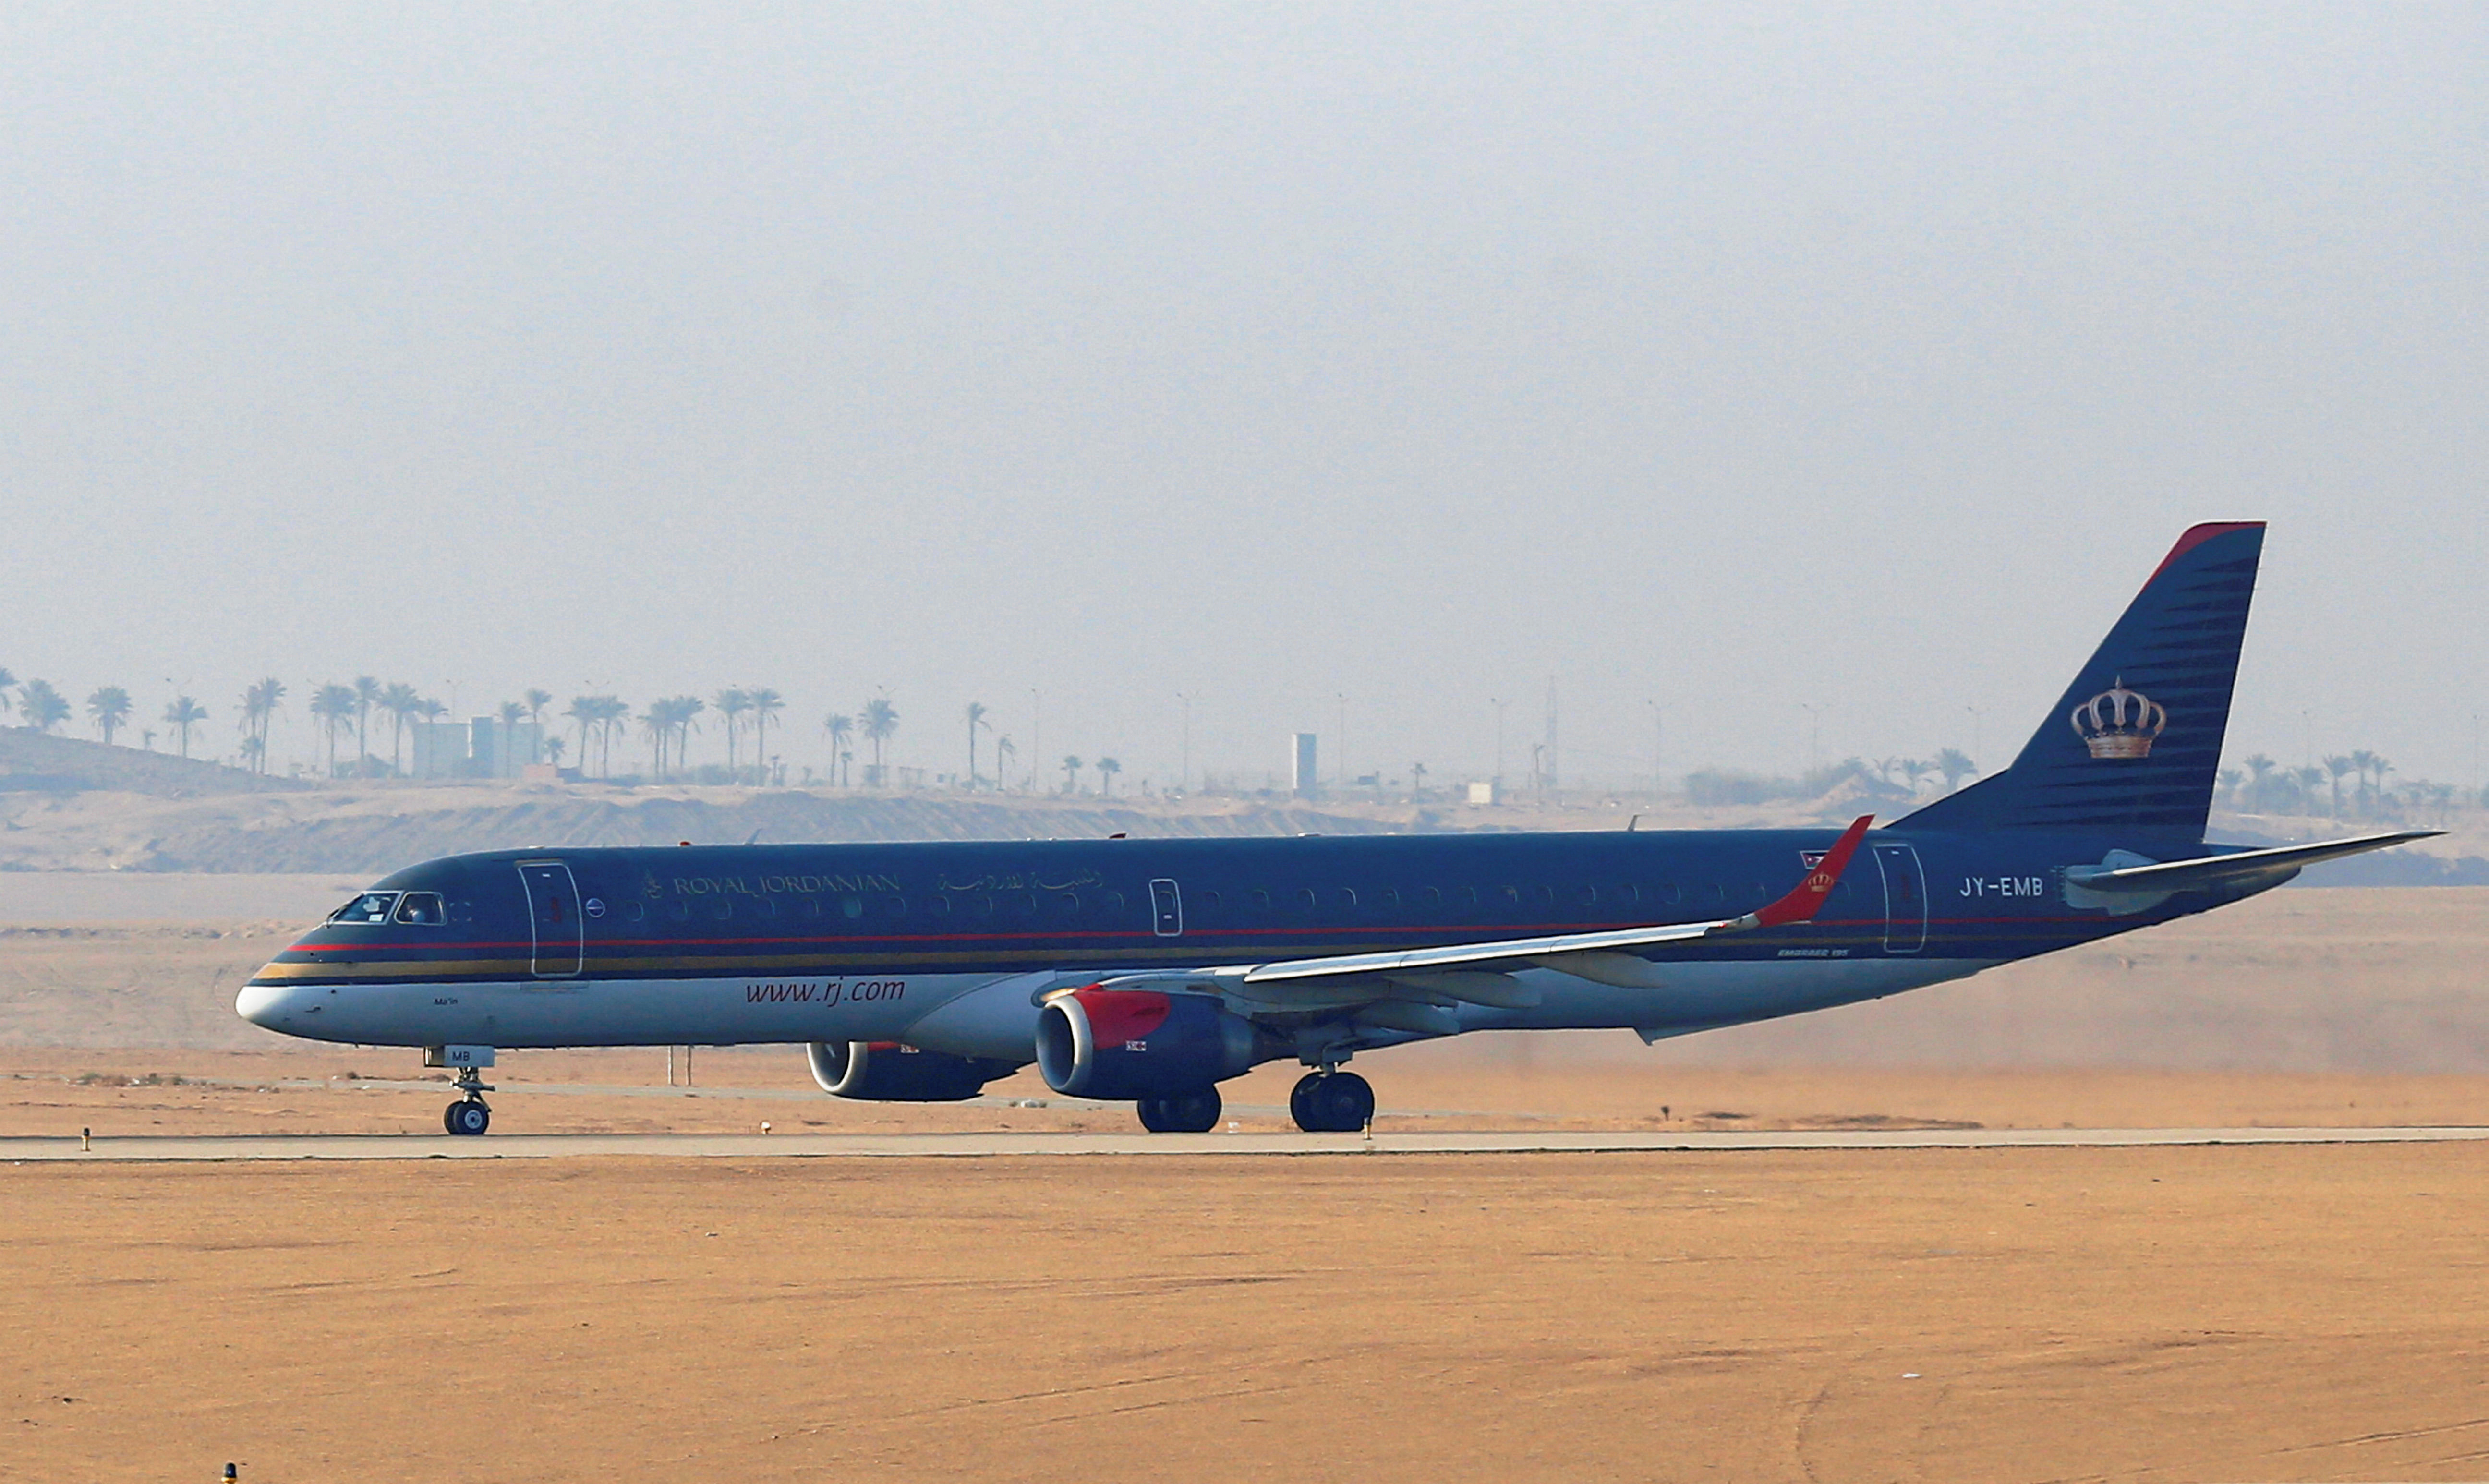 A Royal Jordanian Airlines Embraer	ERJ-195AR plane waits to take off on the runway at Cairo Airport